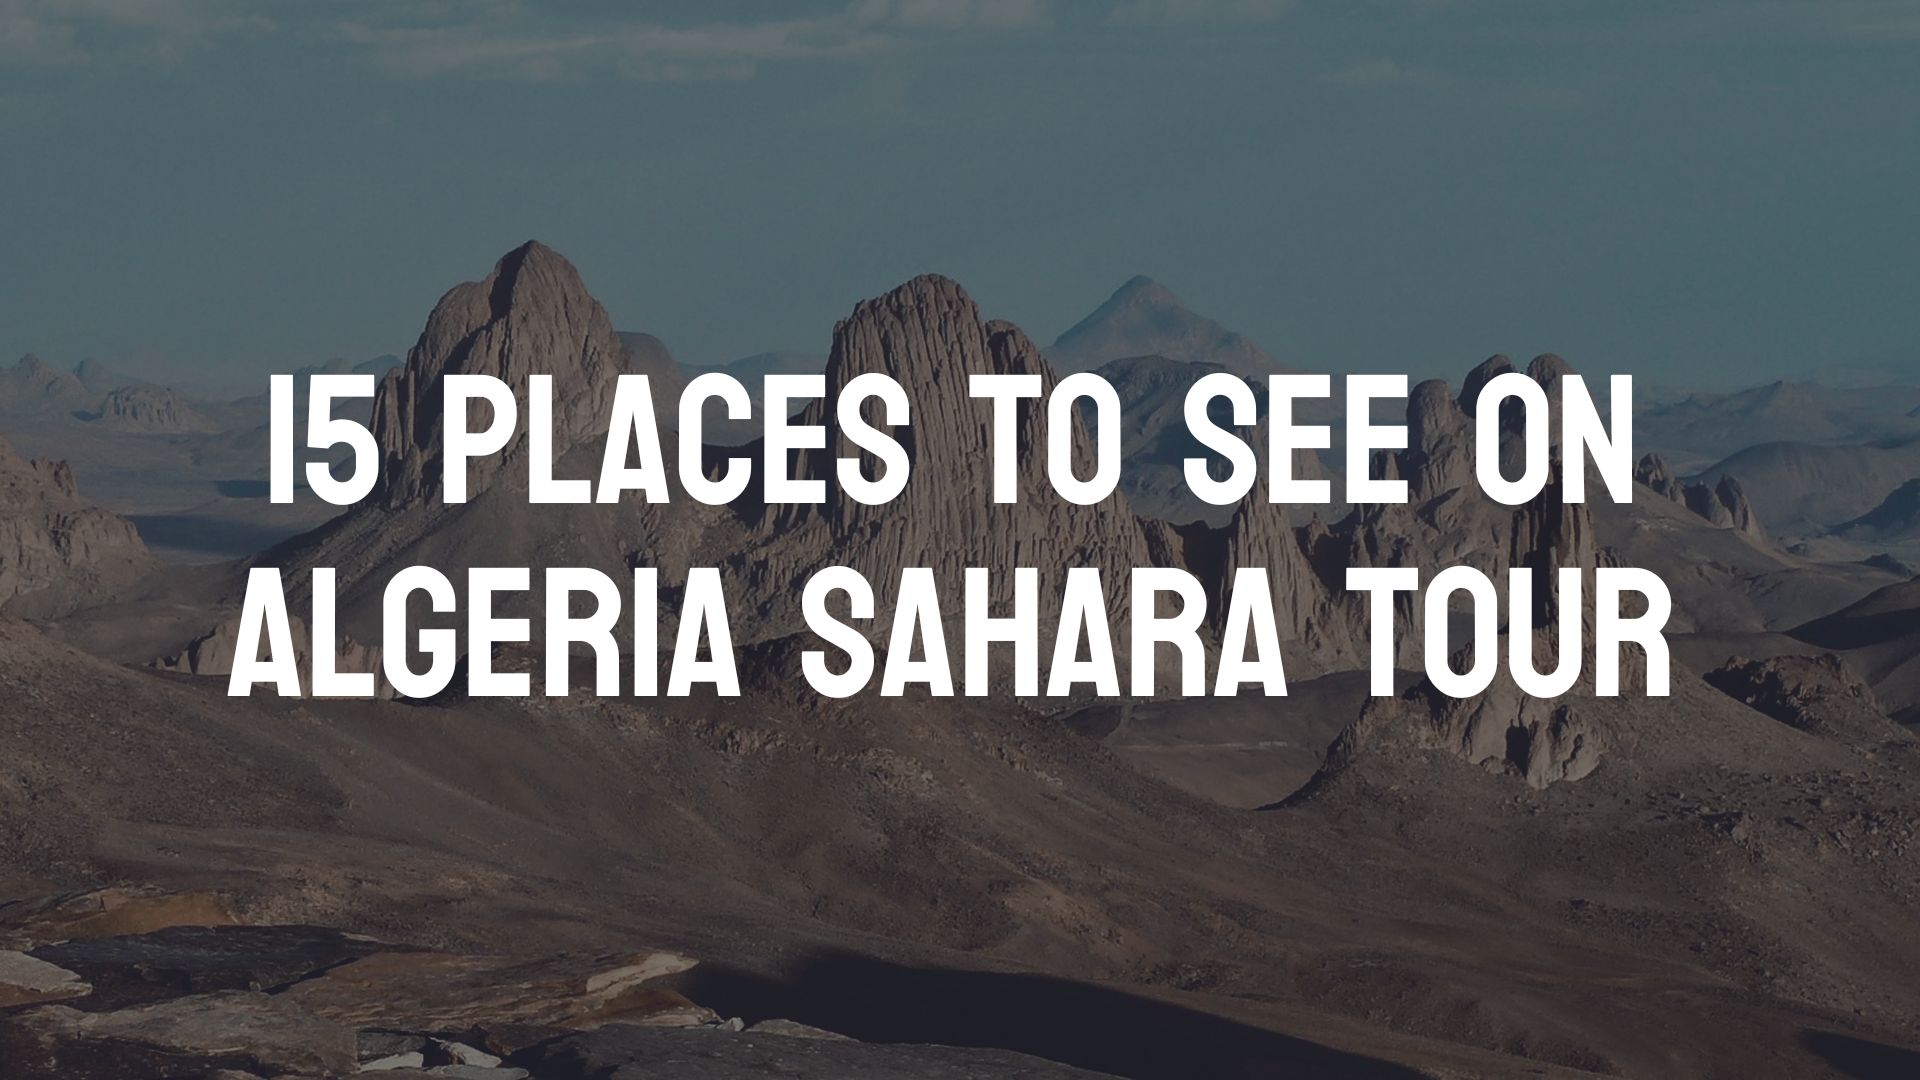 places-to-see-algeria-sahara-tour-attractions